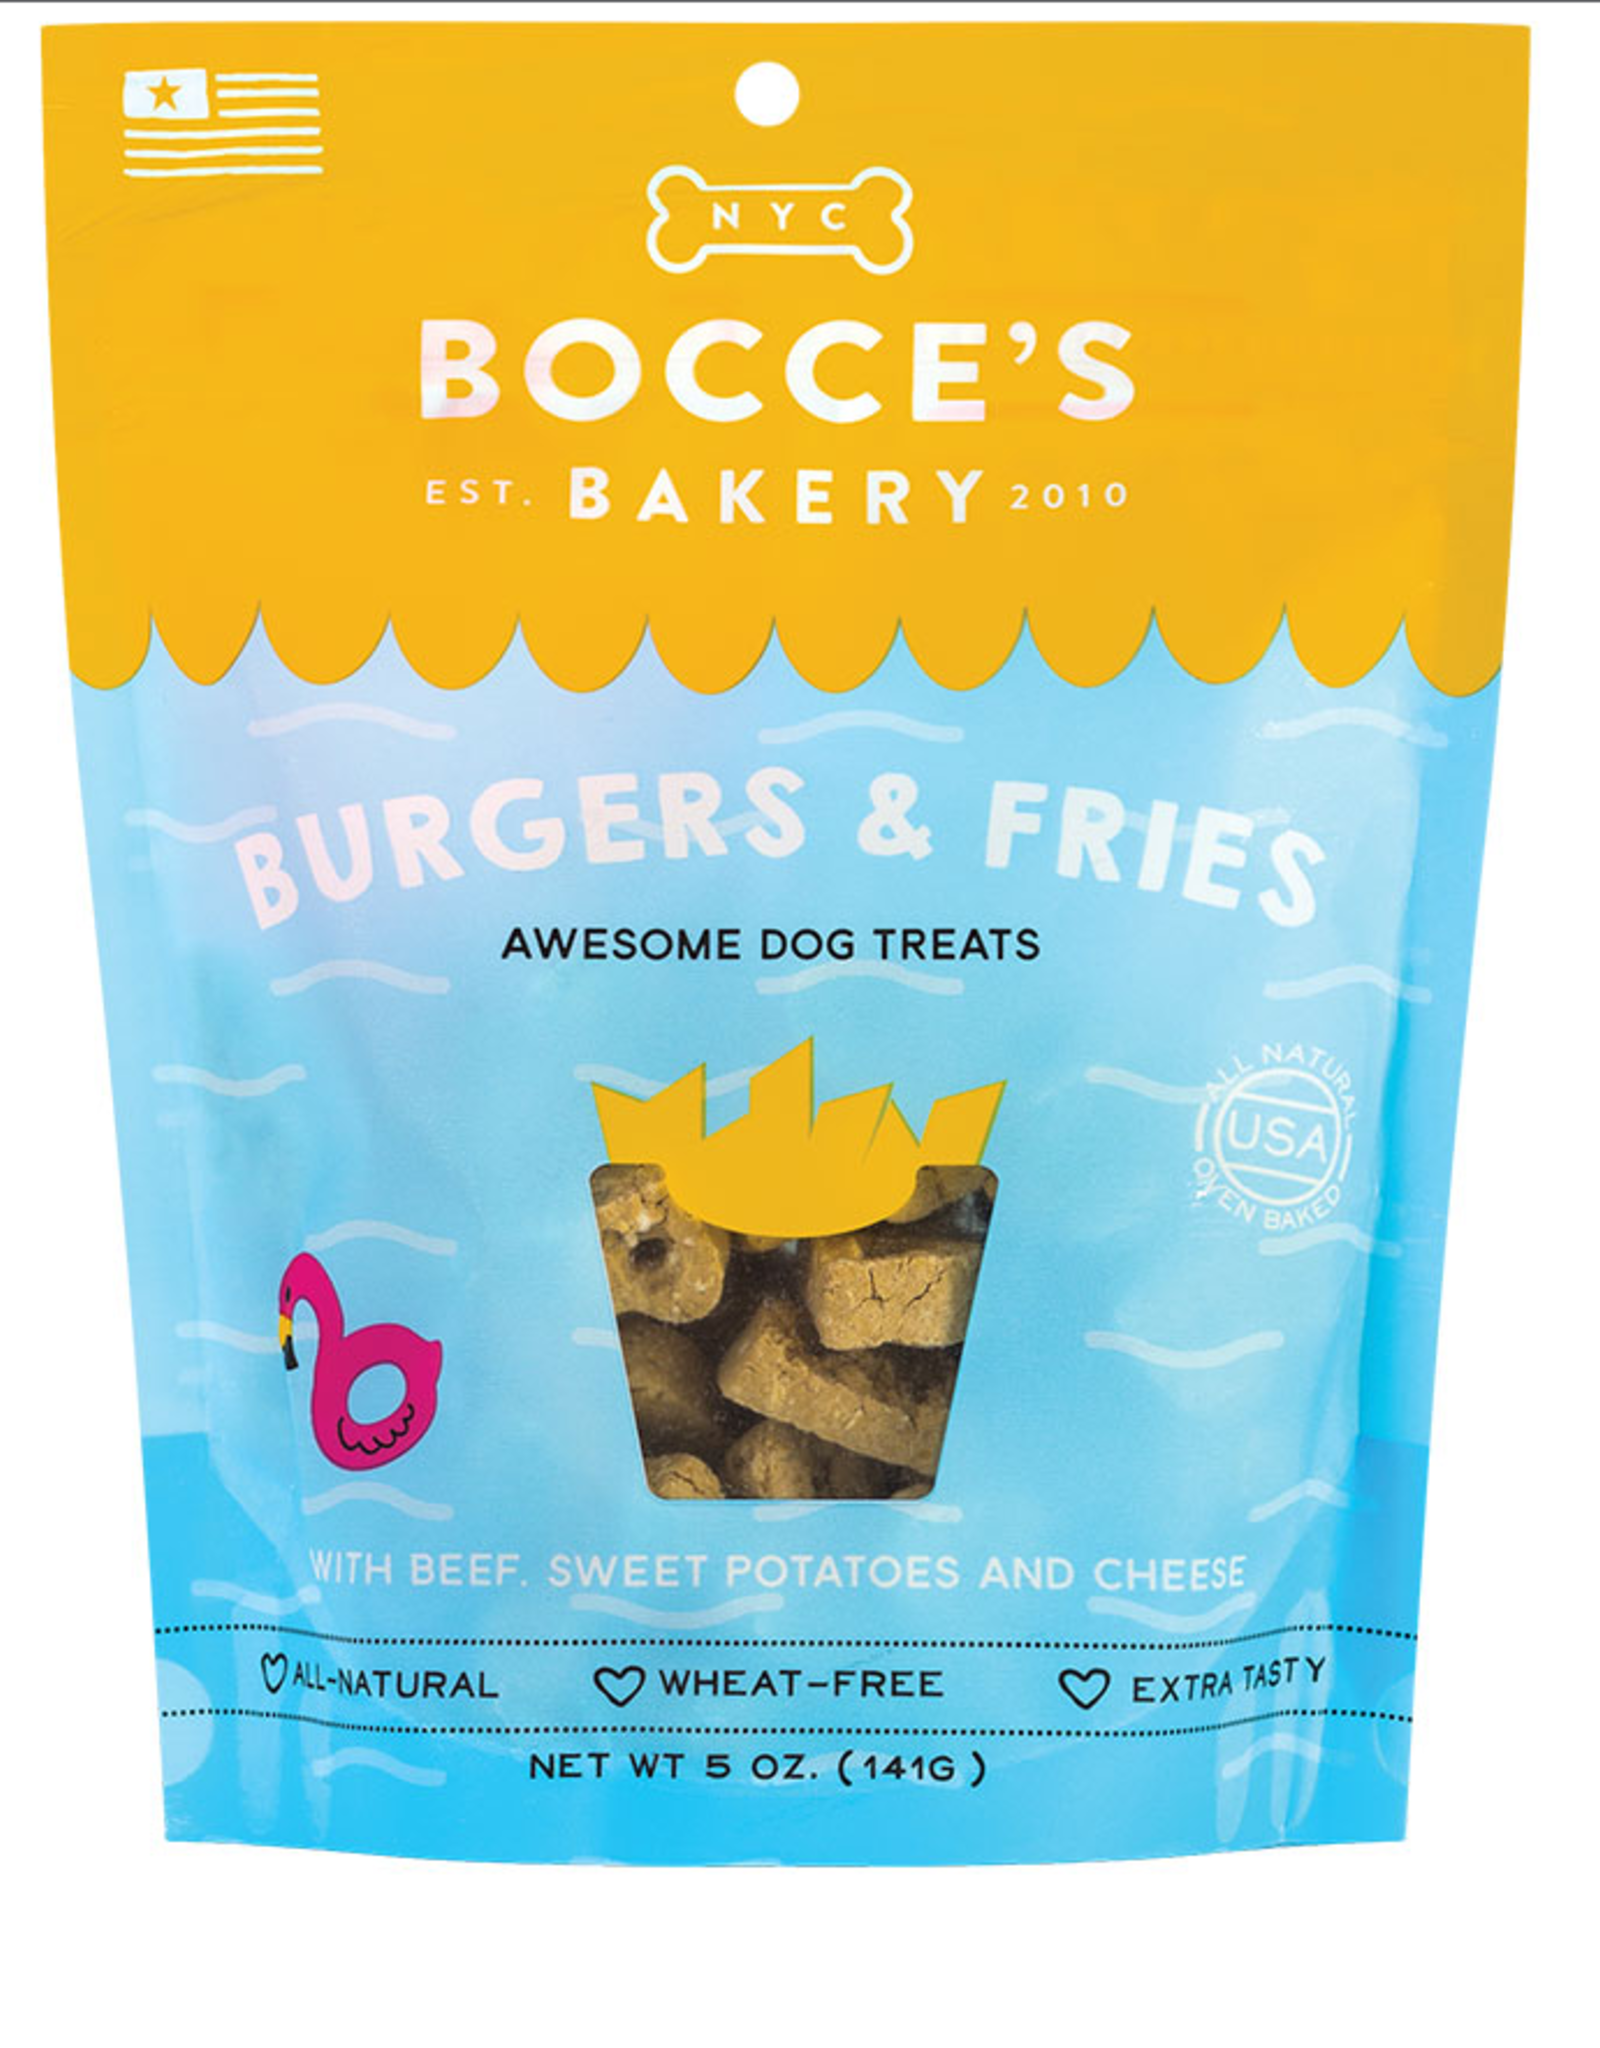 BOCCE'S BAKERY BOCCE'S BAKERY DOG BISCUITS BURGERS & FRIES 5OZ